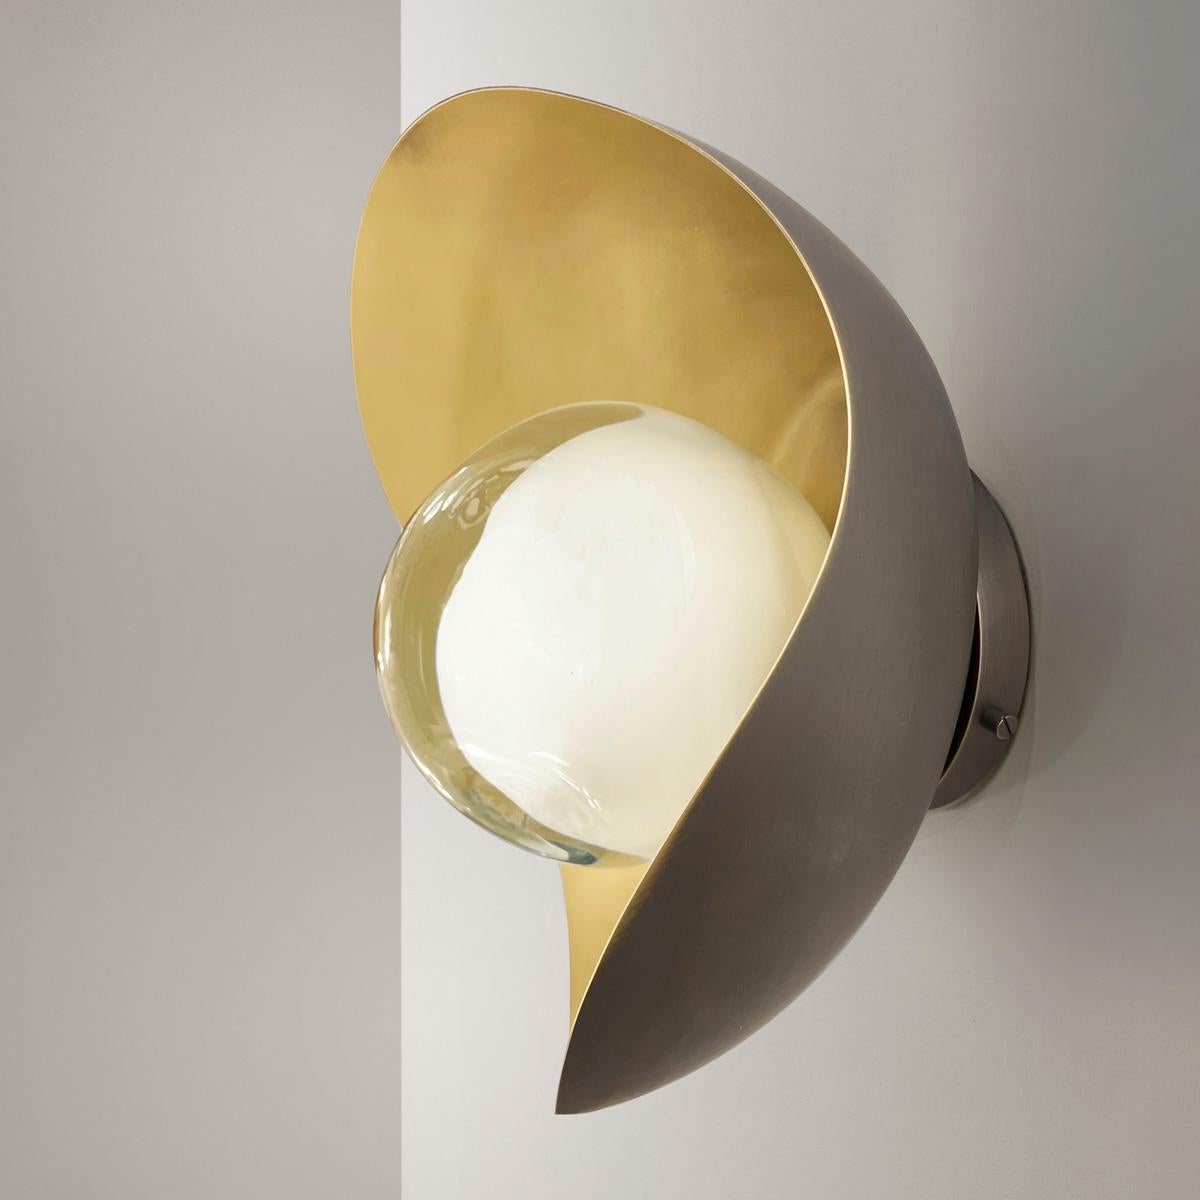 Brass Perla Wall Light by Gaspare Asaro-Polished Copper and Sand White Finish For Sale